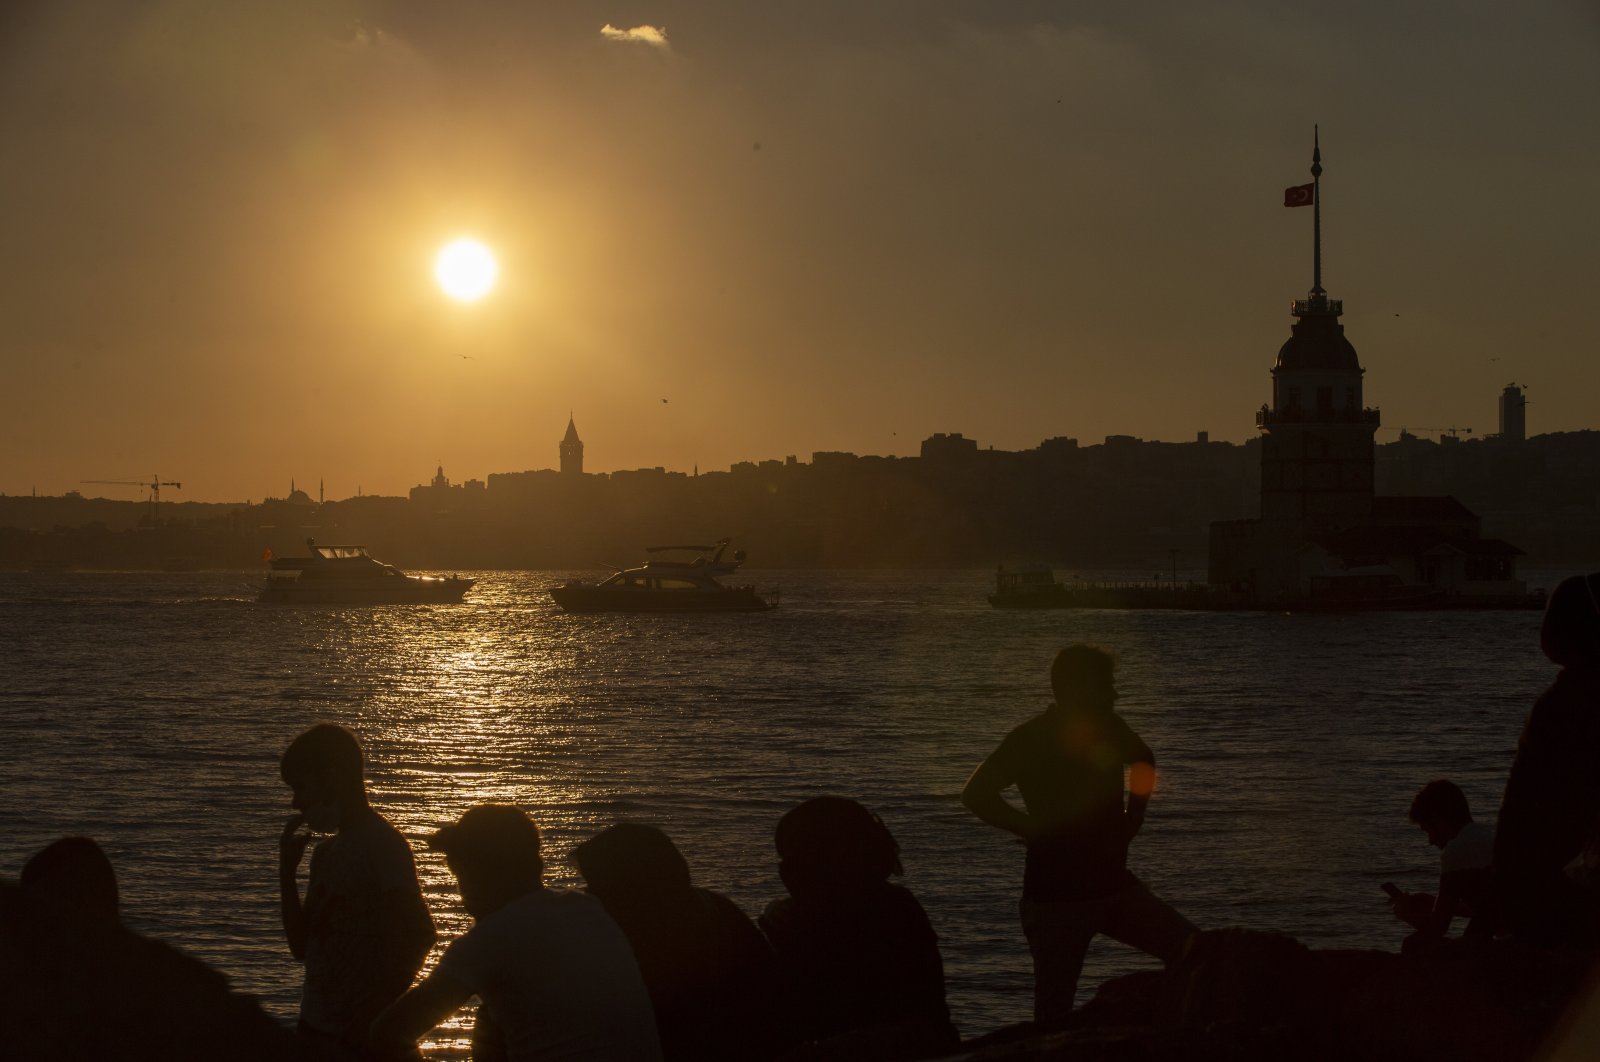 People enjoy themselves near the Bosporus backdropped by the Galata Tower and the Maiden's Tower at sunset in Istanbul, Aug. 23, 2020. (EPA Photo)